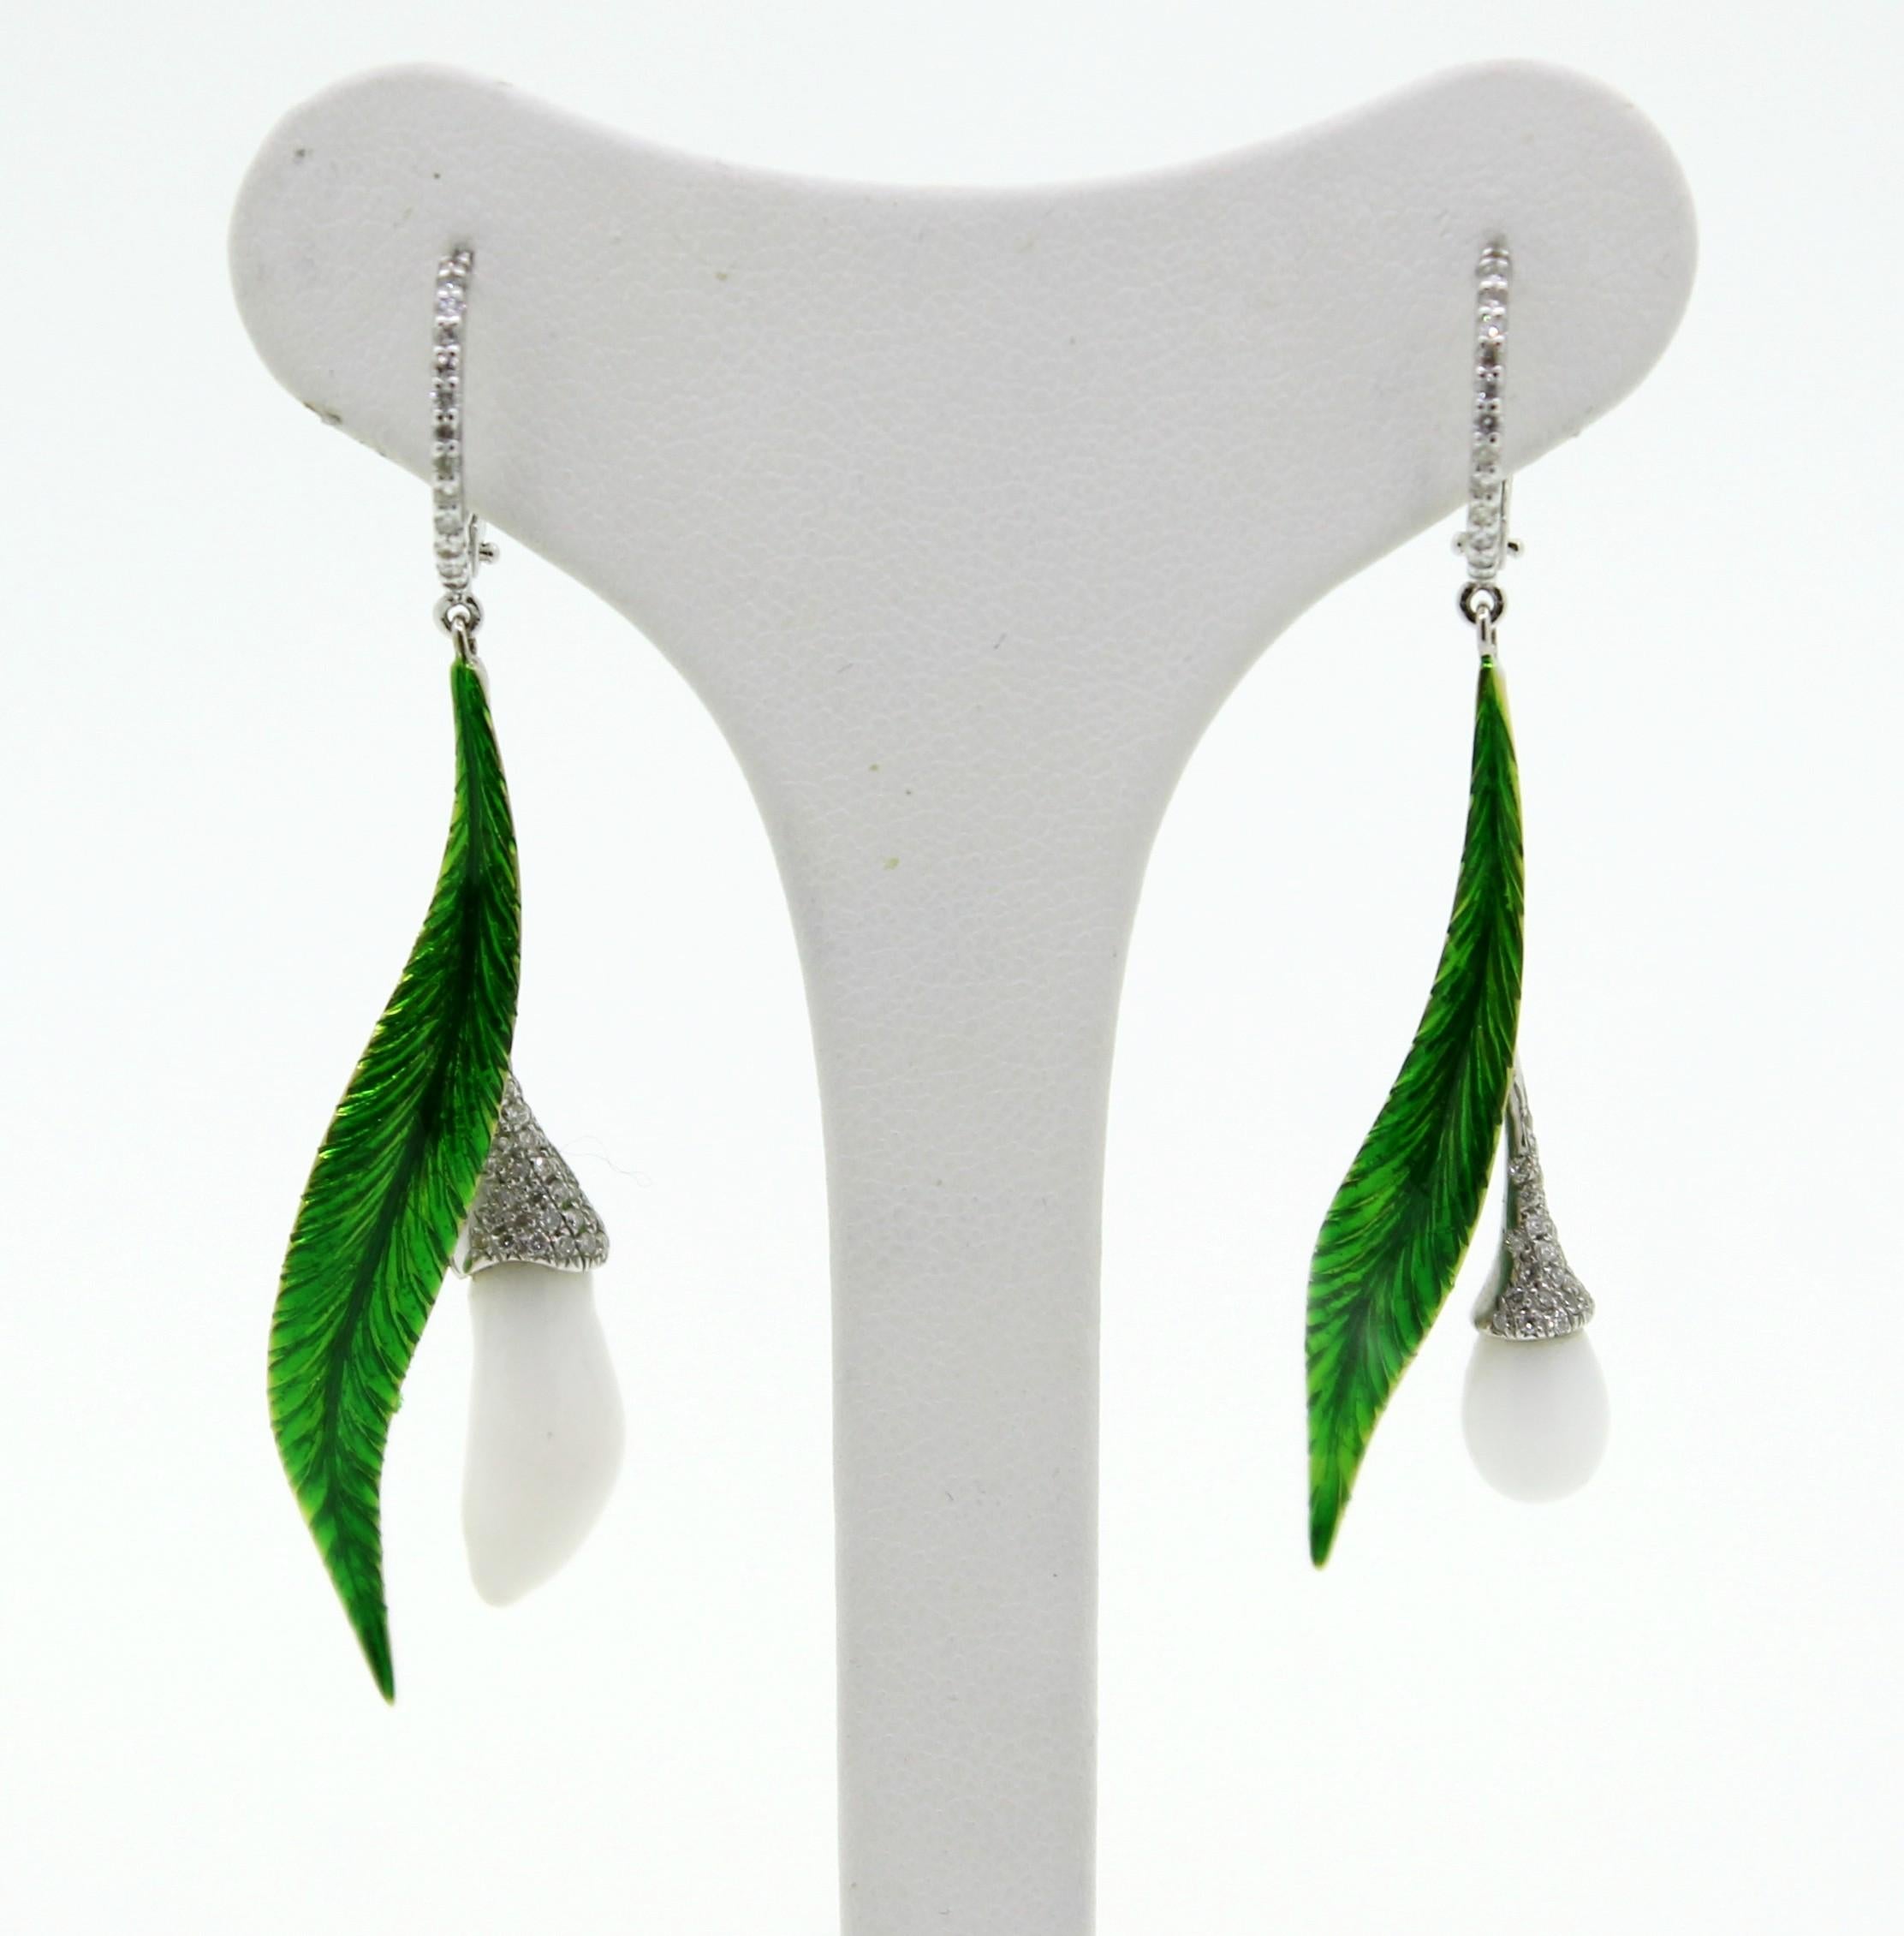 The Harmony of Nature inspires these White Natural Pearls and White Diamonds Dangle Earrings.
The natural different Shape of the Pearls is embraced by 2 Hand-Enameled Golden Leaves, giving the Earrings the shape of an inverted calla.
These Dangle